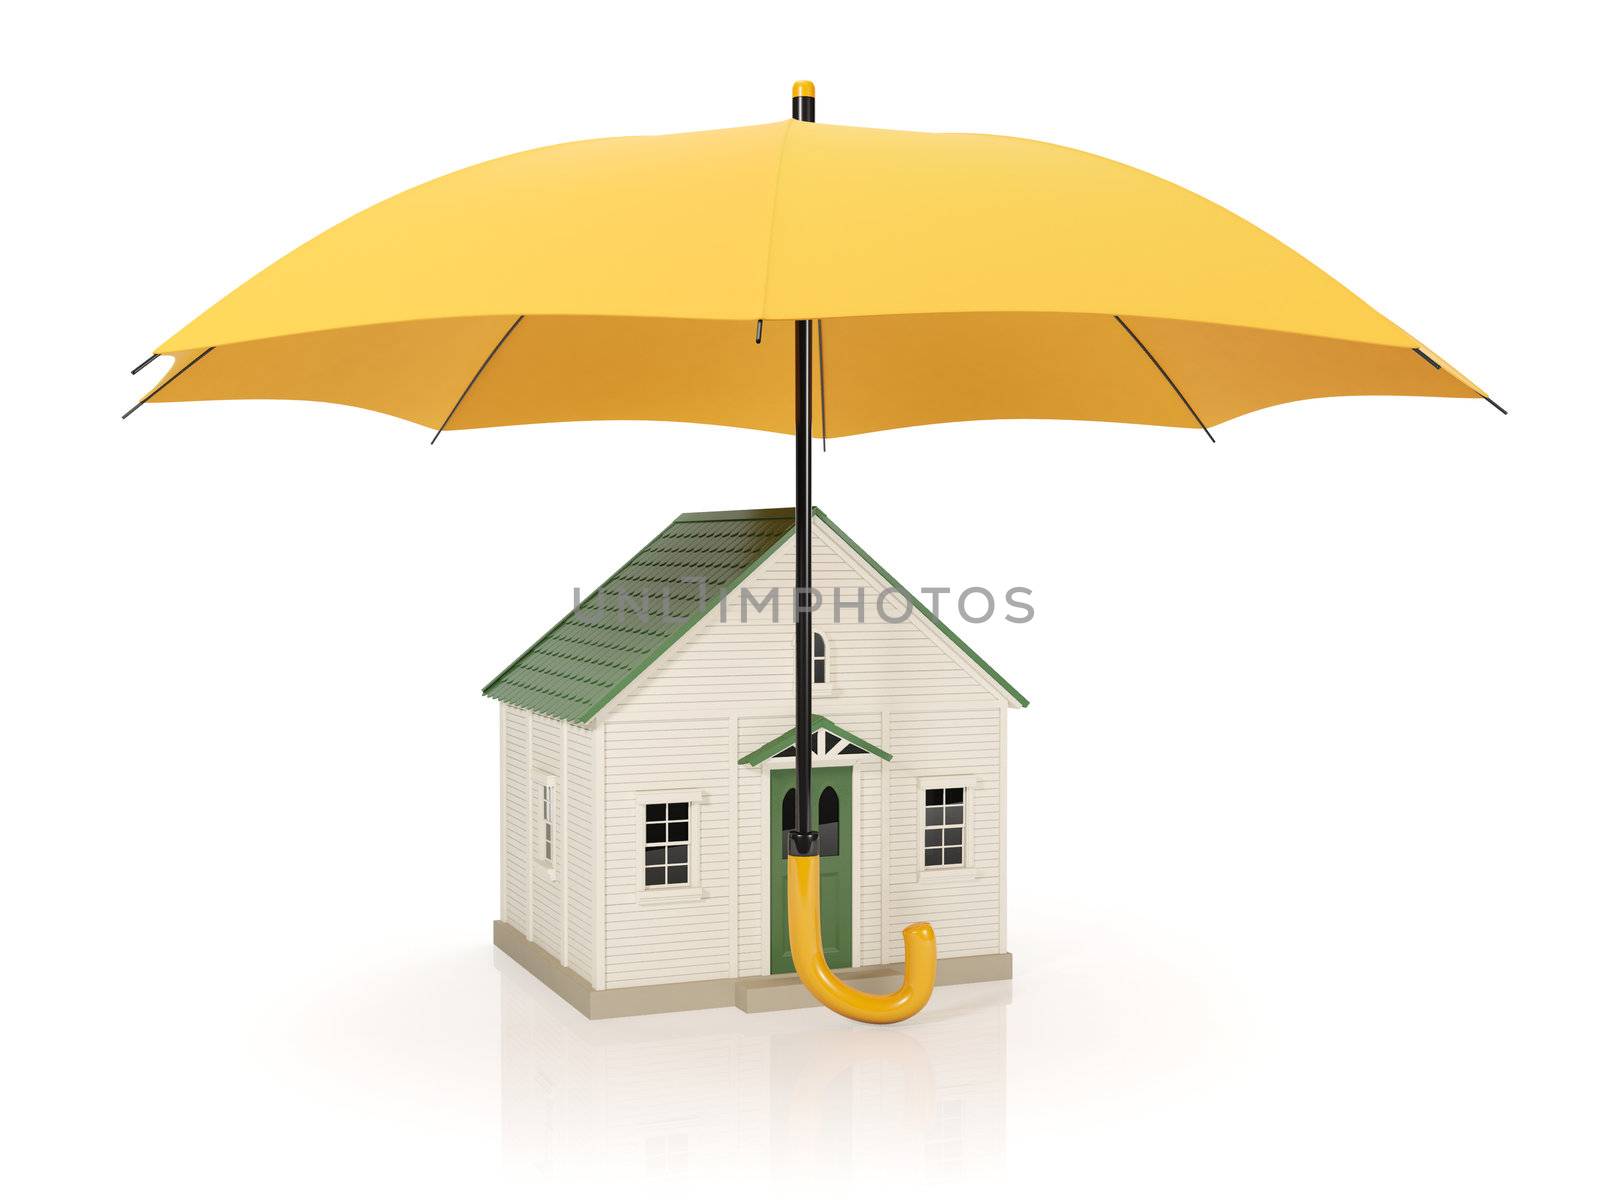 3d illustration: Protecting homes from poor conditions, an umbrella